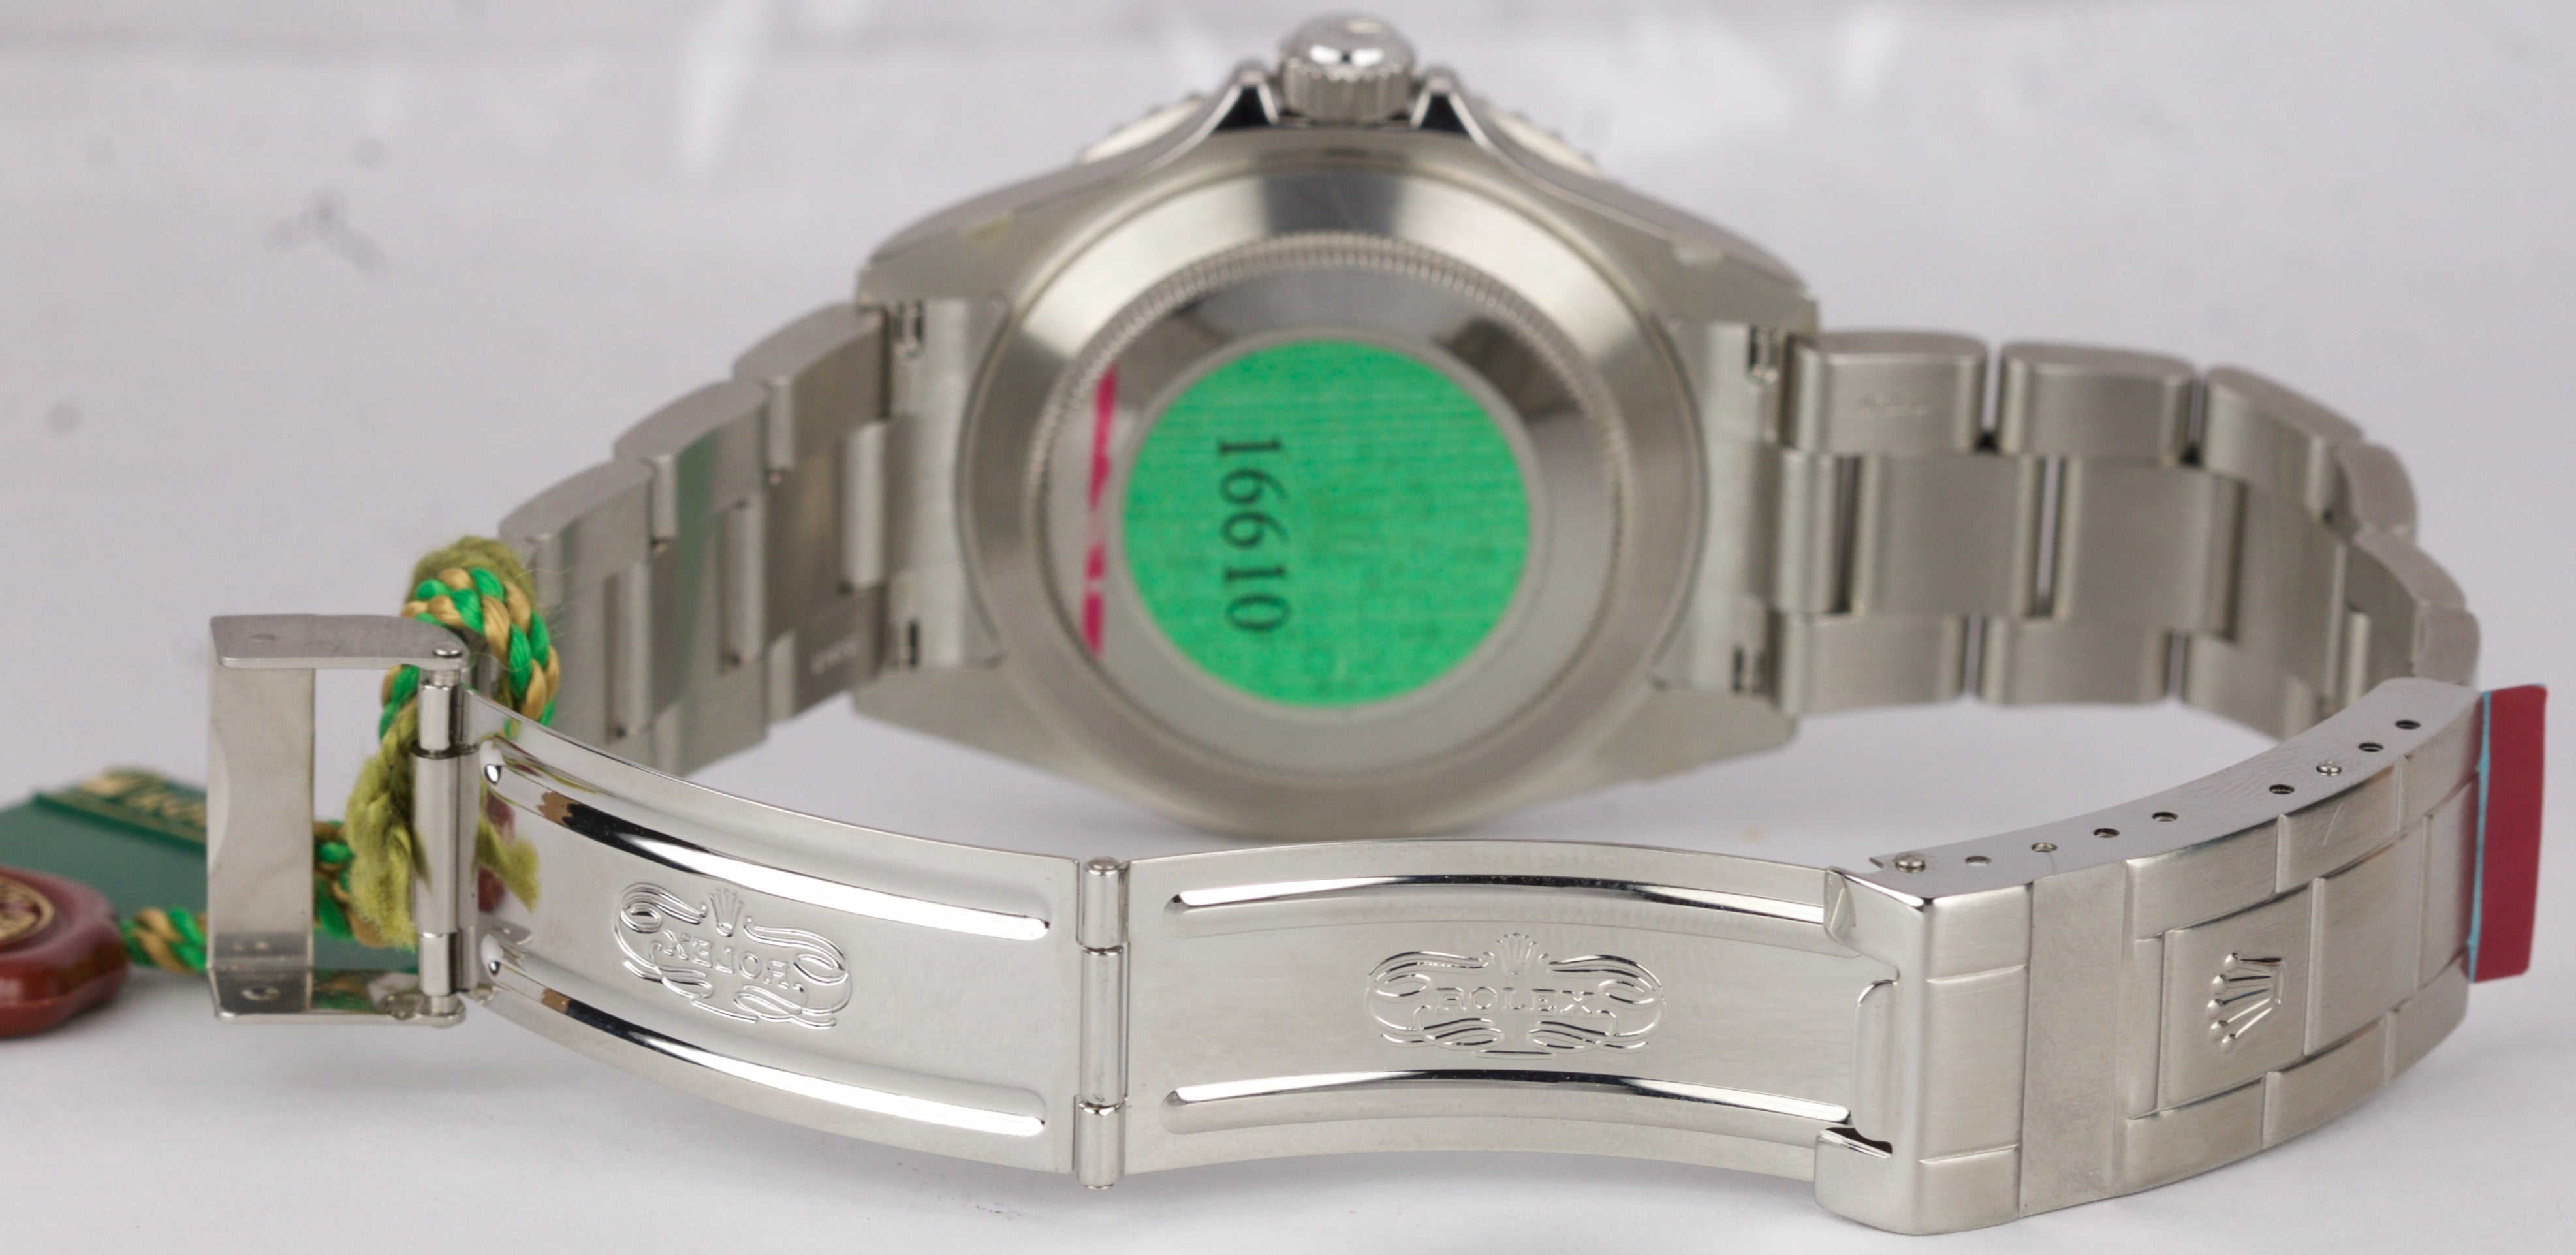 HQ Milton - Rolex Green Submariner 16610 LV Mark 1 Dial and Flat 4 Bezel,  Inventory #1611, For Sale